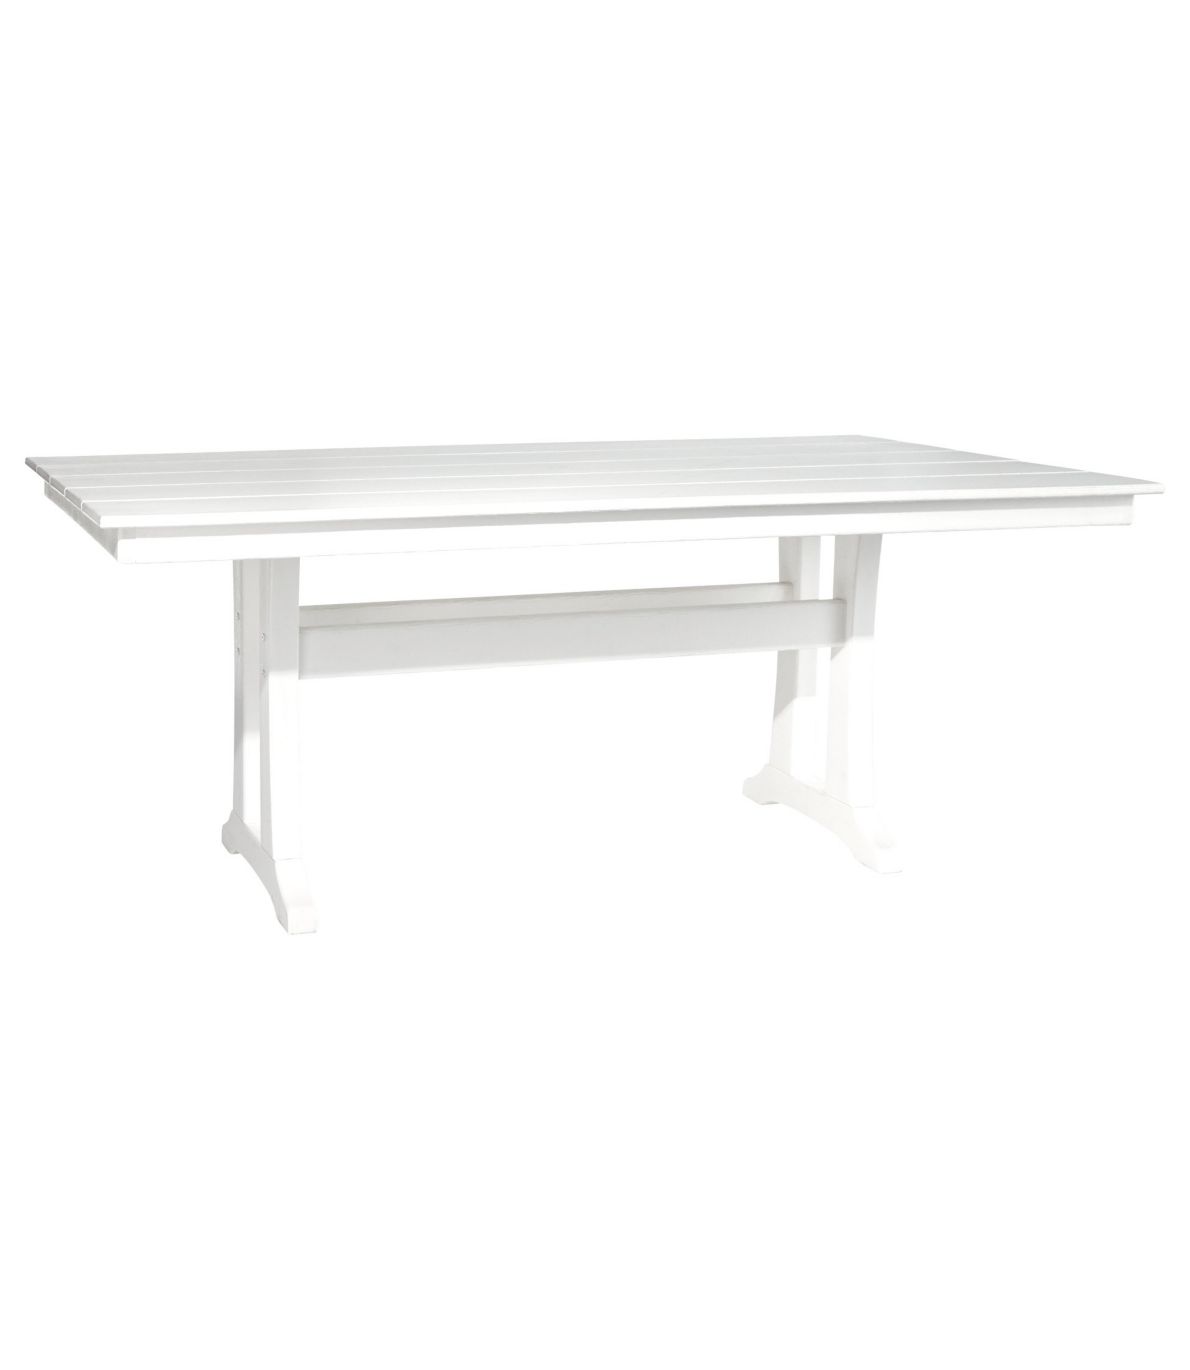 All-Weather Farmhouse Table, Large